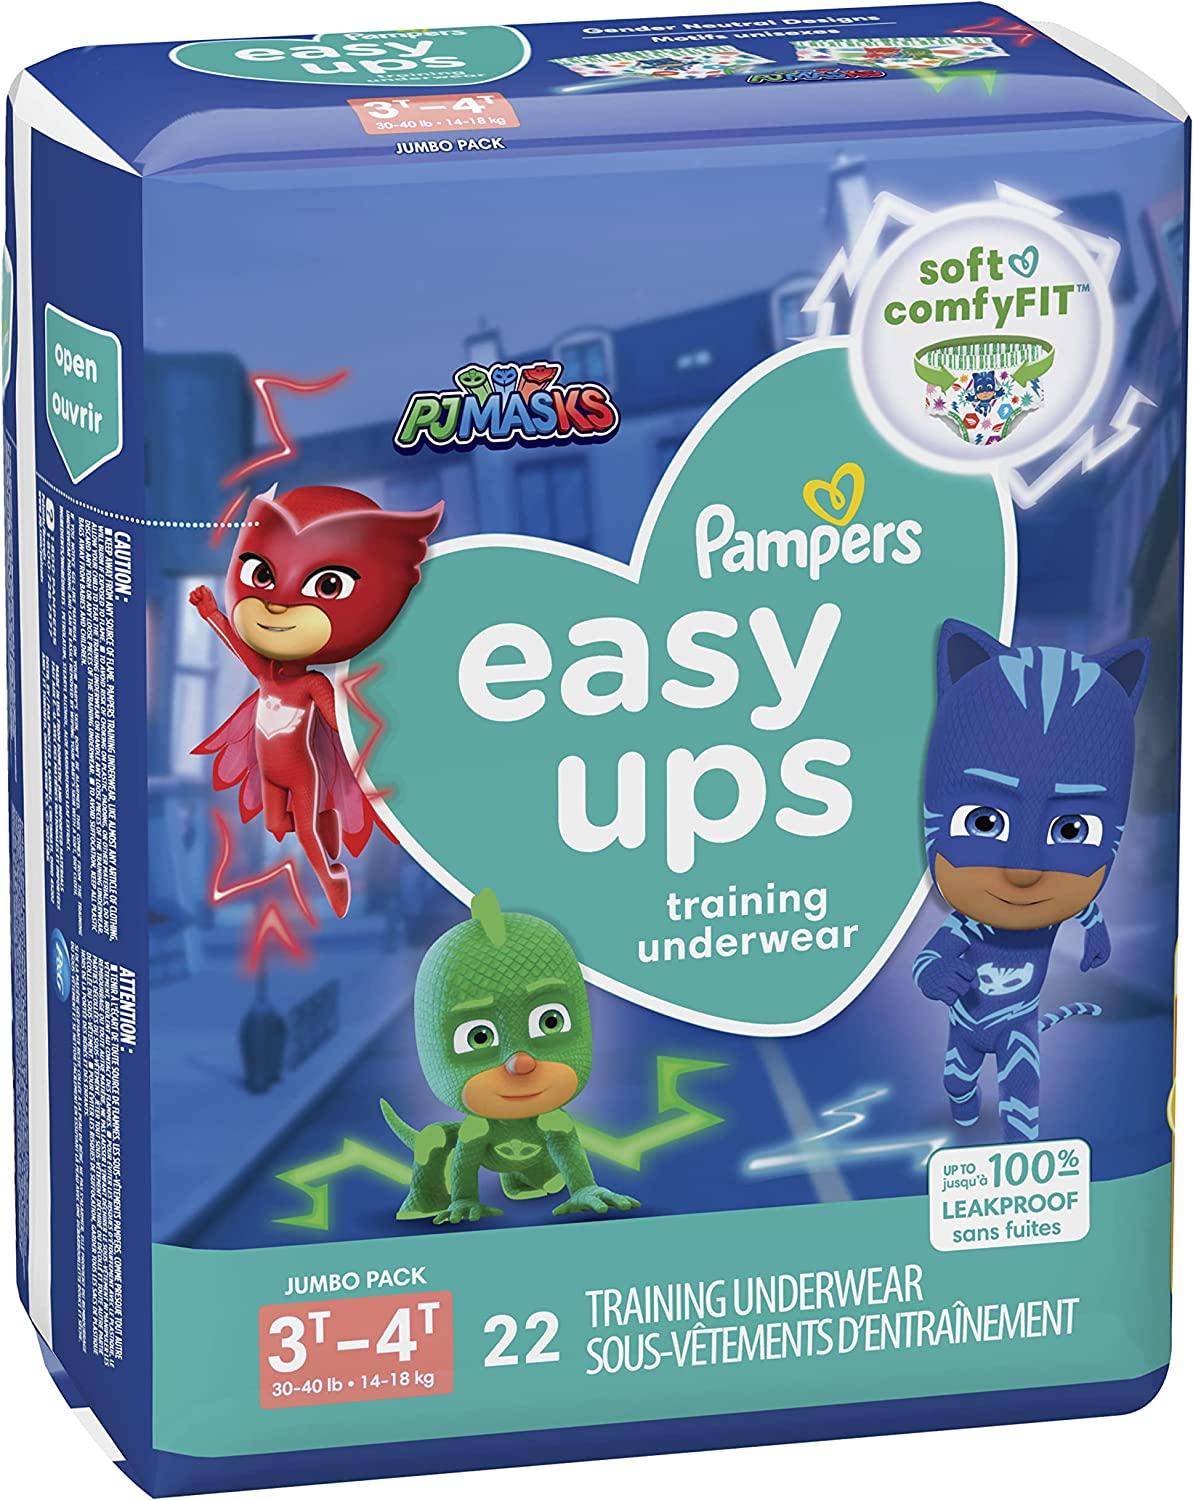 Easy Ups Training Underwear Boys Size 6 4T-5T, 18 units – Pampers